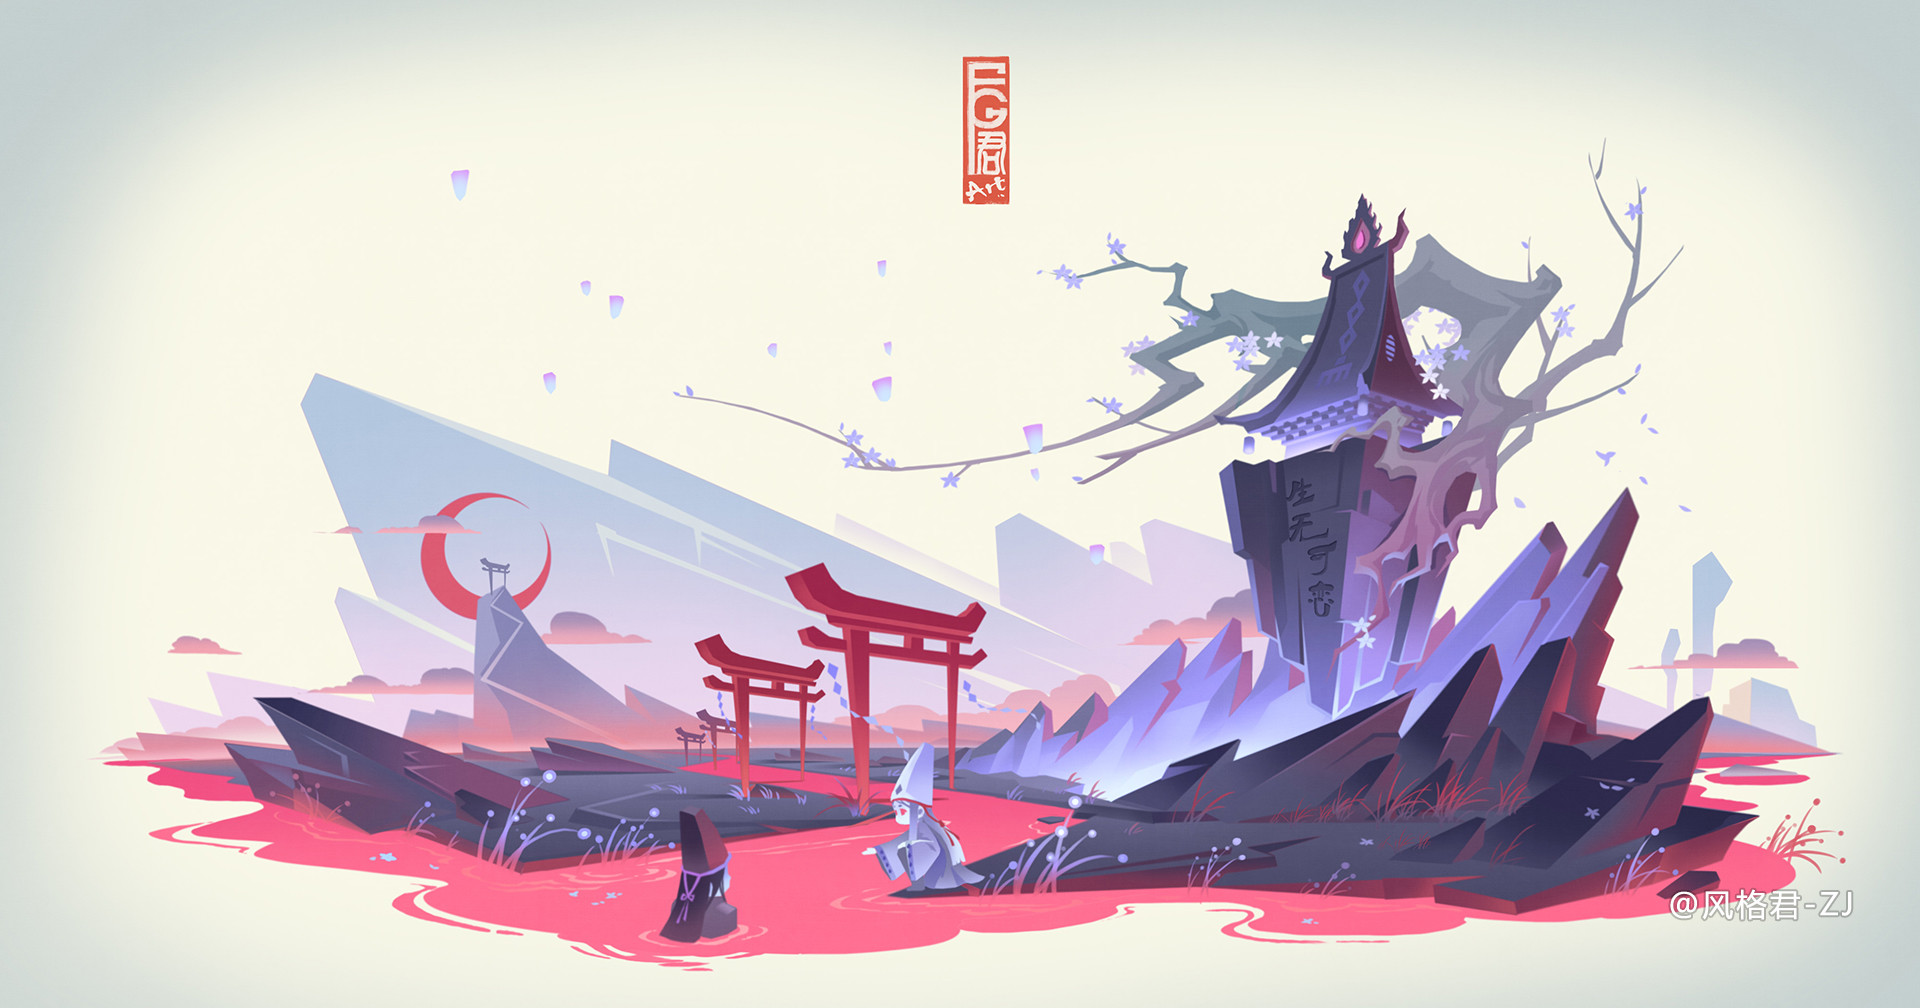 General 1920x1008 Jun Zhang Asian architecture white background digital art river Moon crescent moon clouds